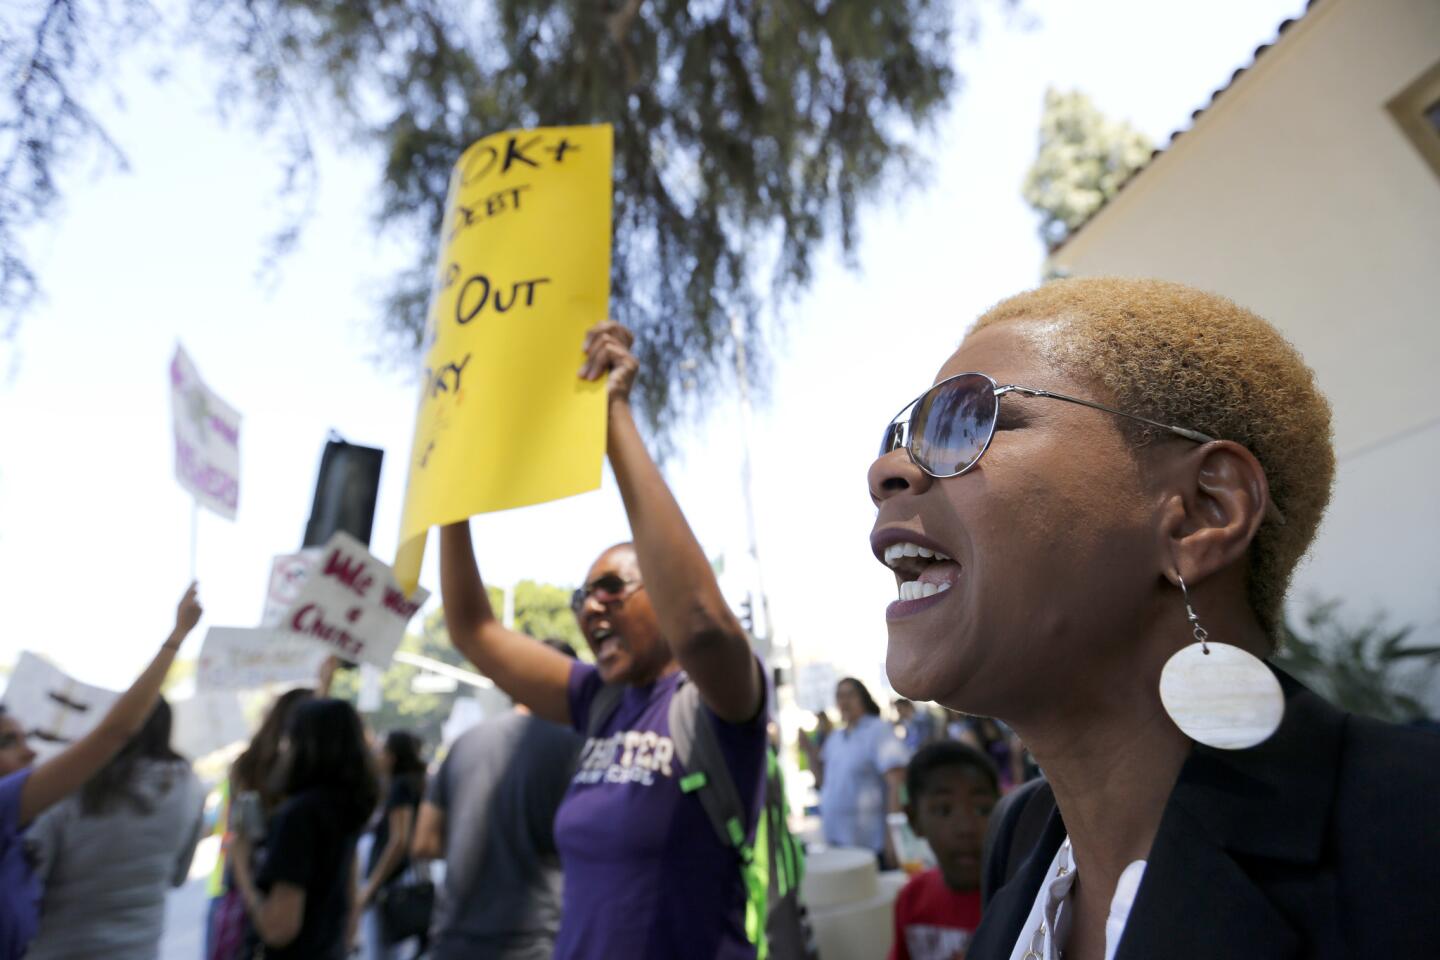 Photo Gallery: Whittier Law School students protest the closing of the Costa Mesa campus